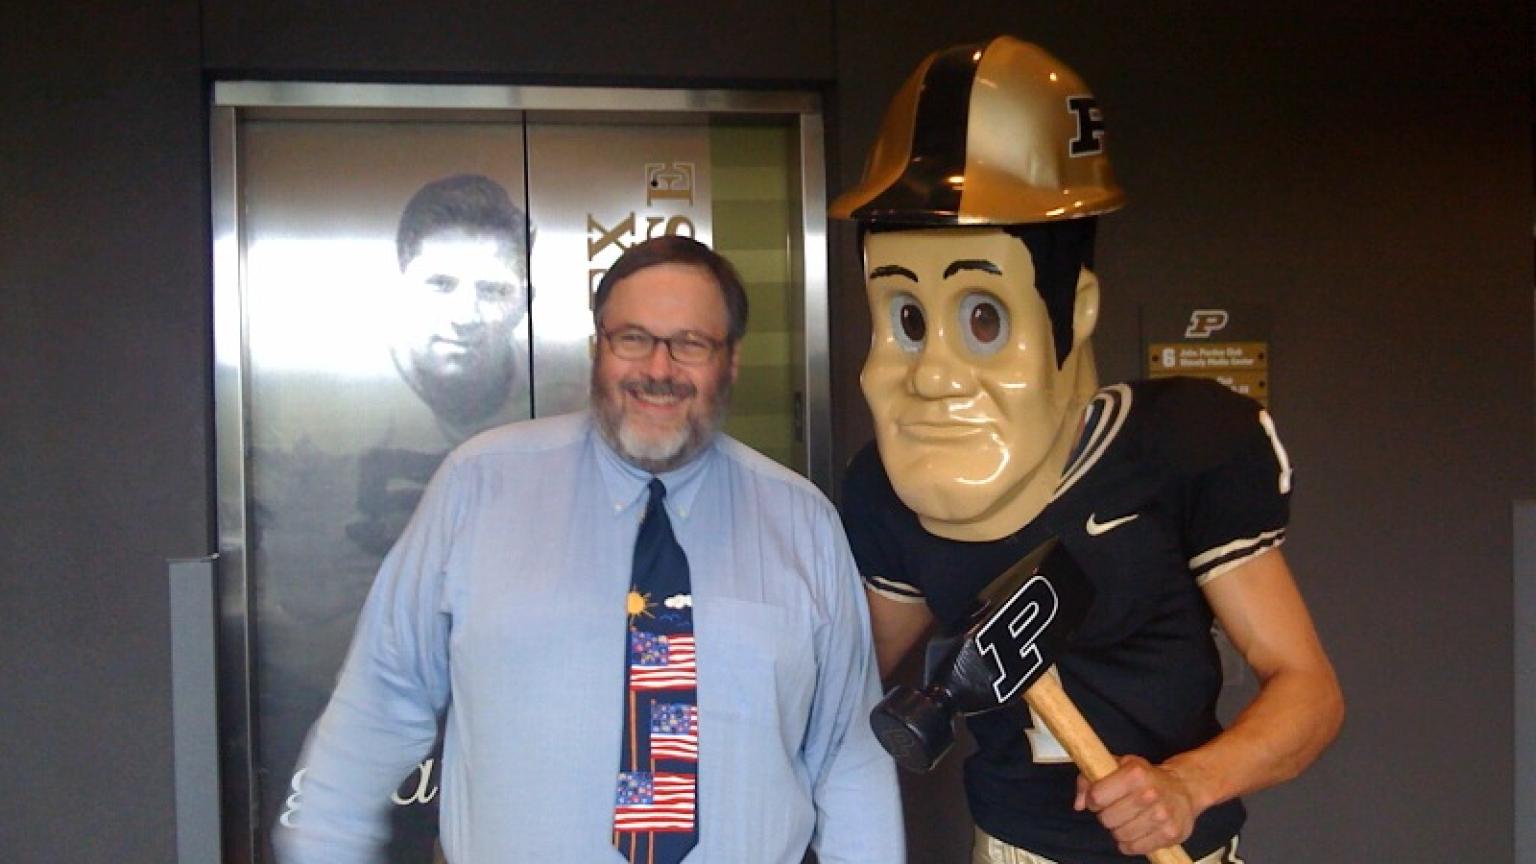 Kent with the Purdue mascot